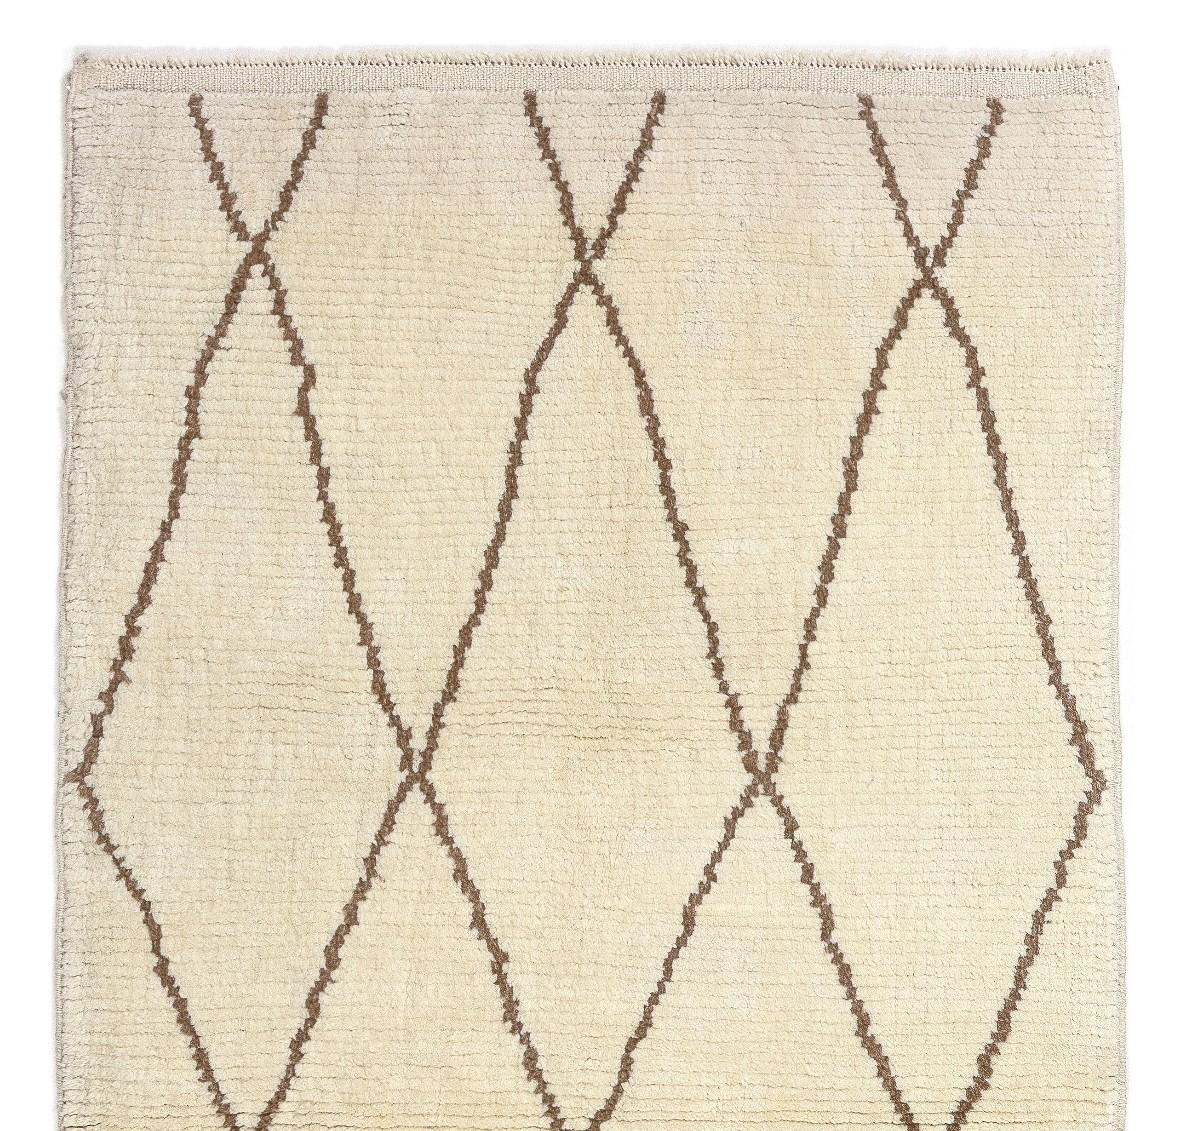 A contemporary hand-knotted Moroccan rug, made of plant dyed sheep wool. 
Soft, comfy pile that is ideal for families with kids. Size 3.4x6 Ft

Available as it is or made to measure in any size and color combination requested.